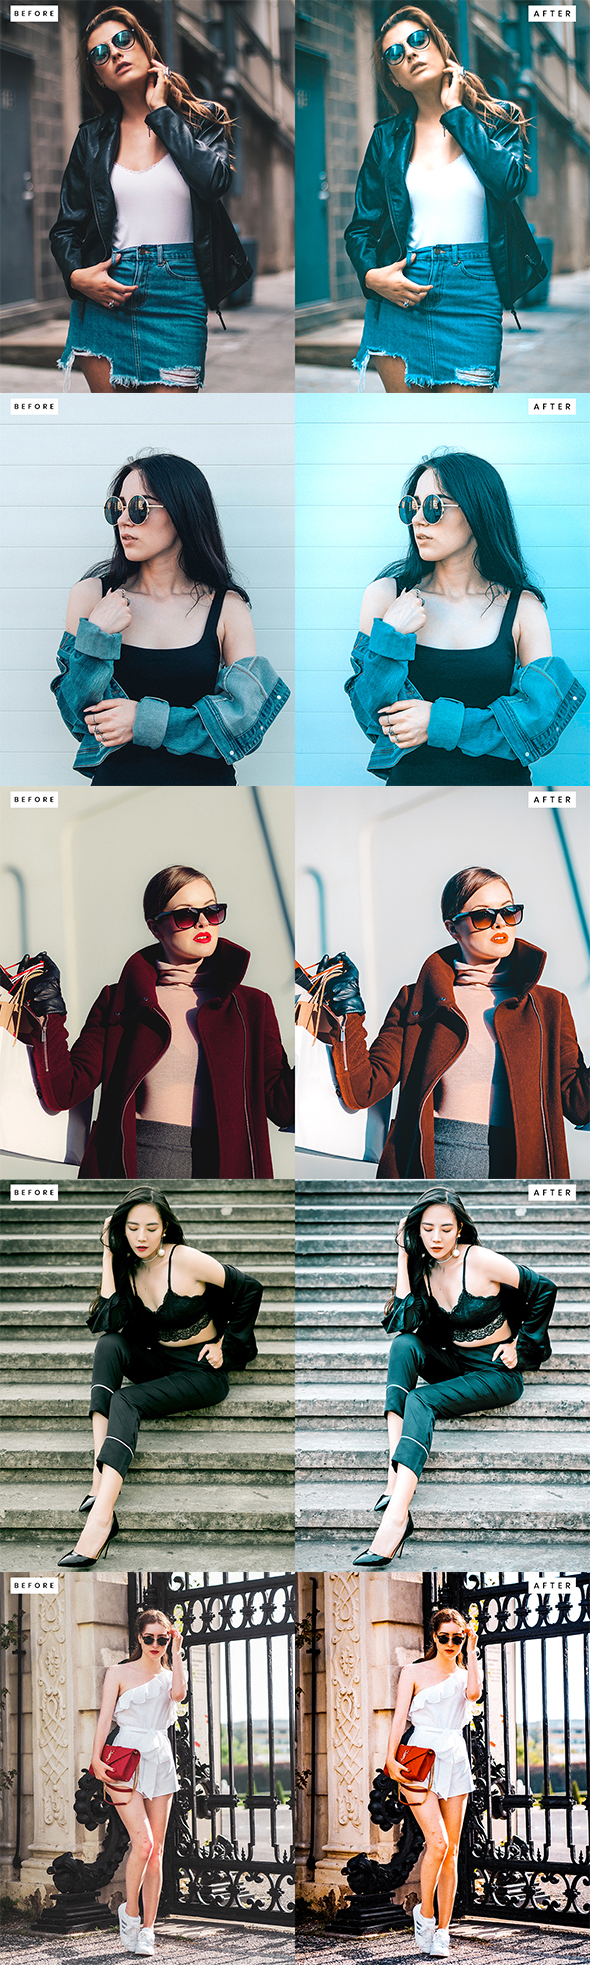 High Fashion Photoshop Actions